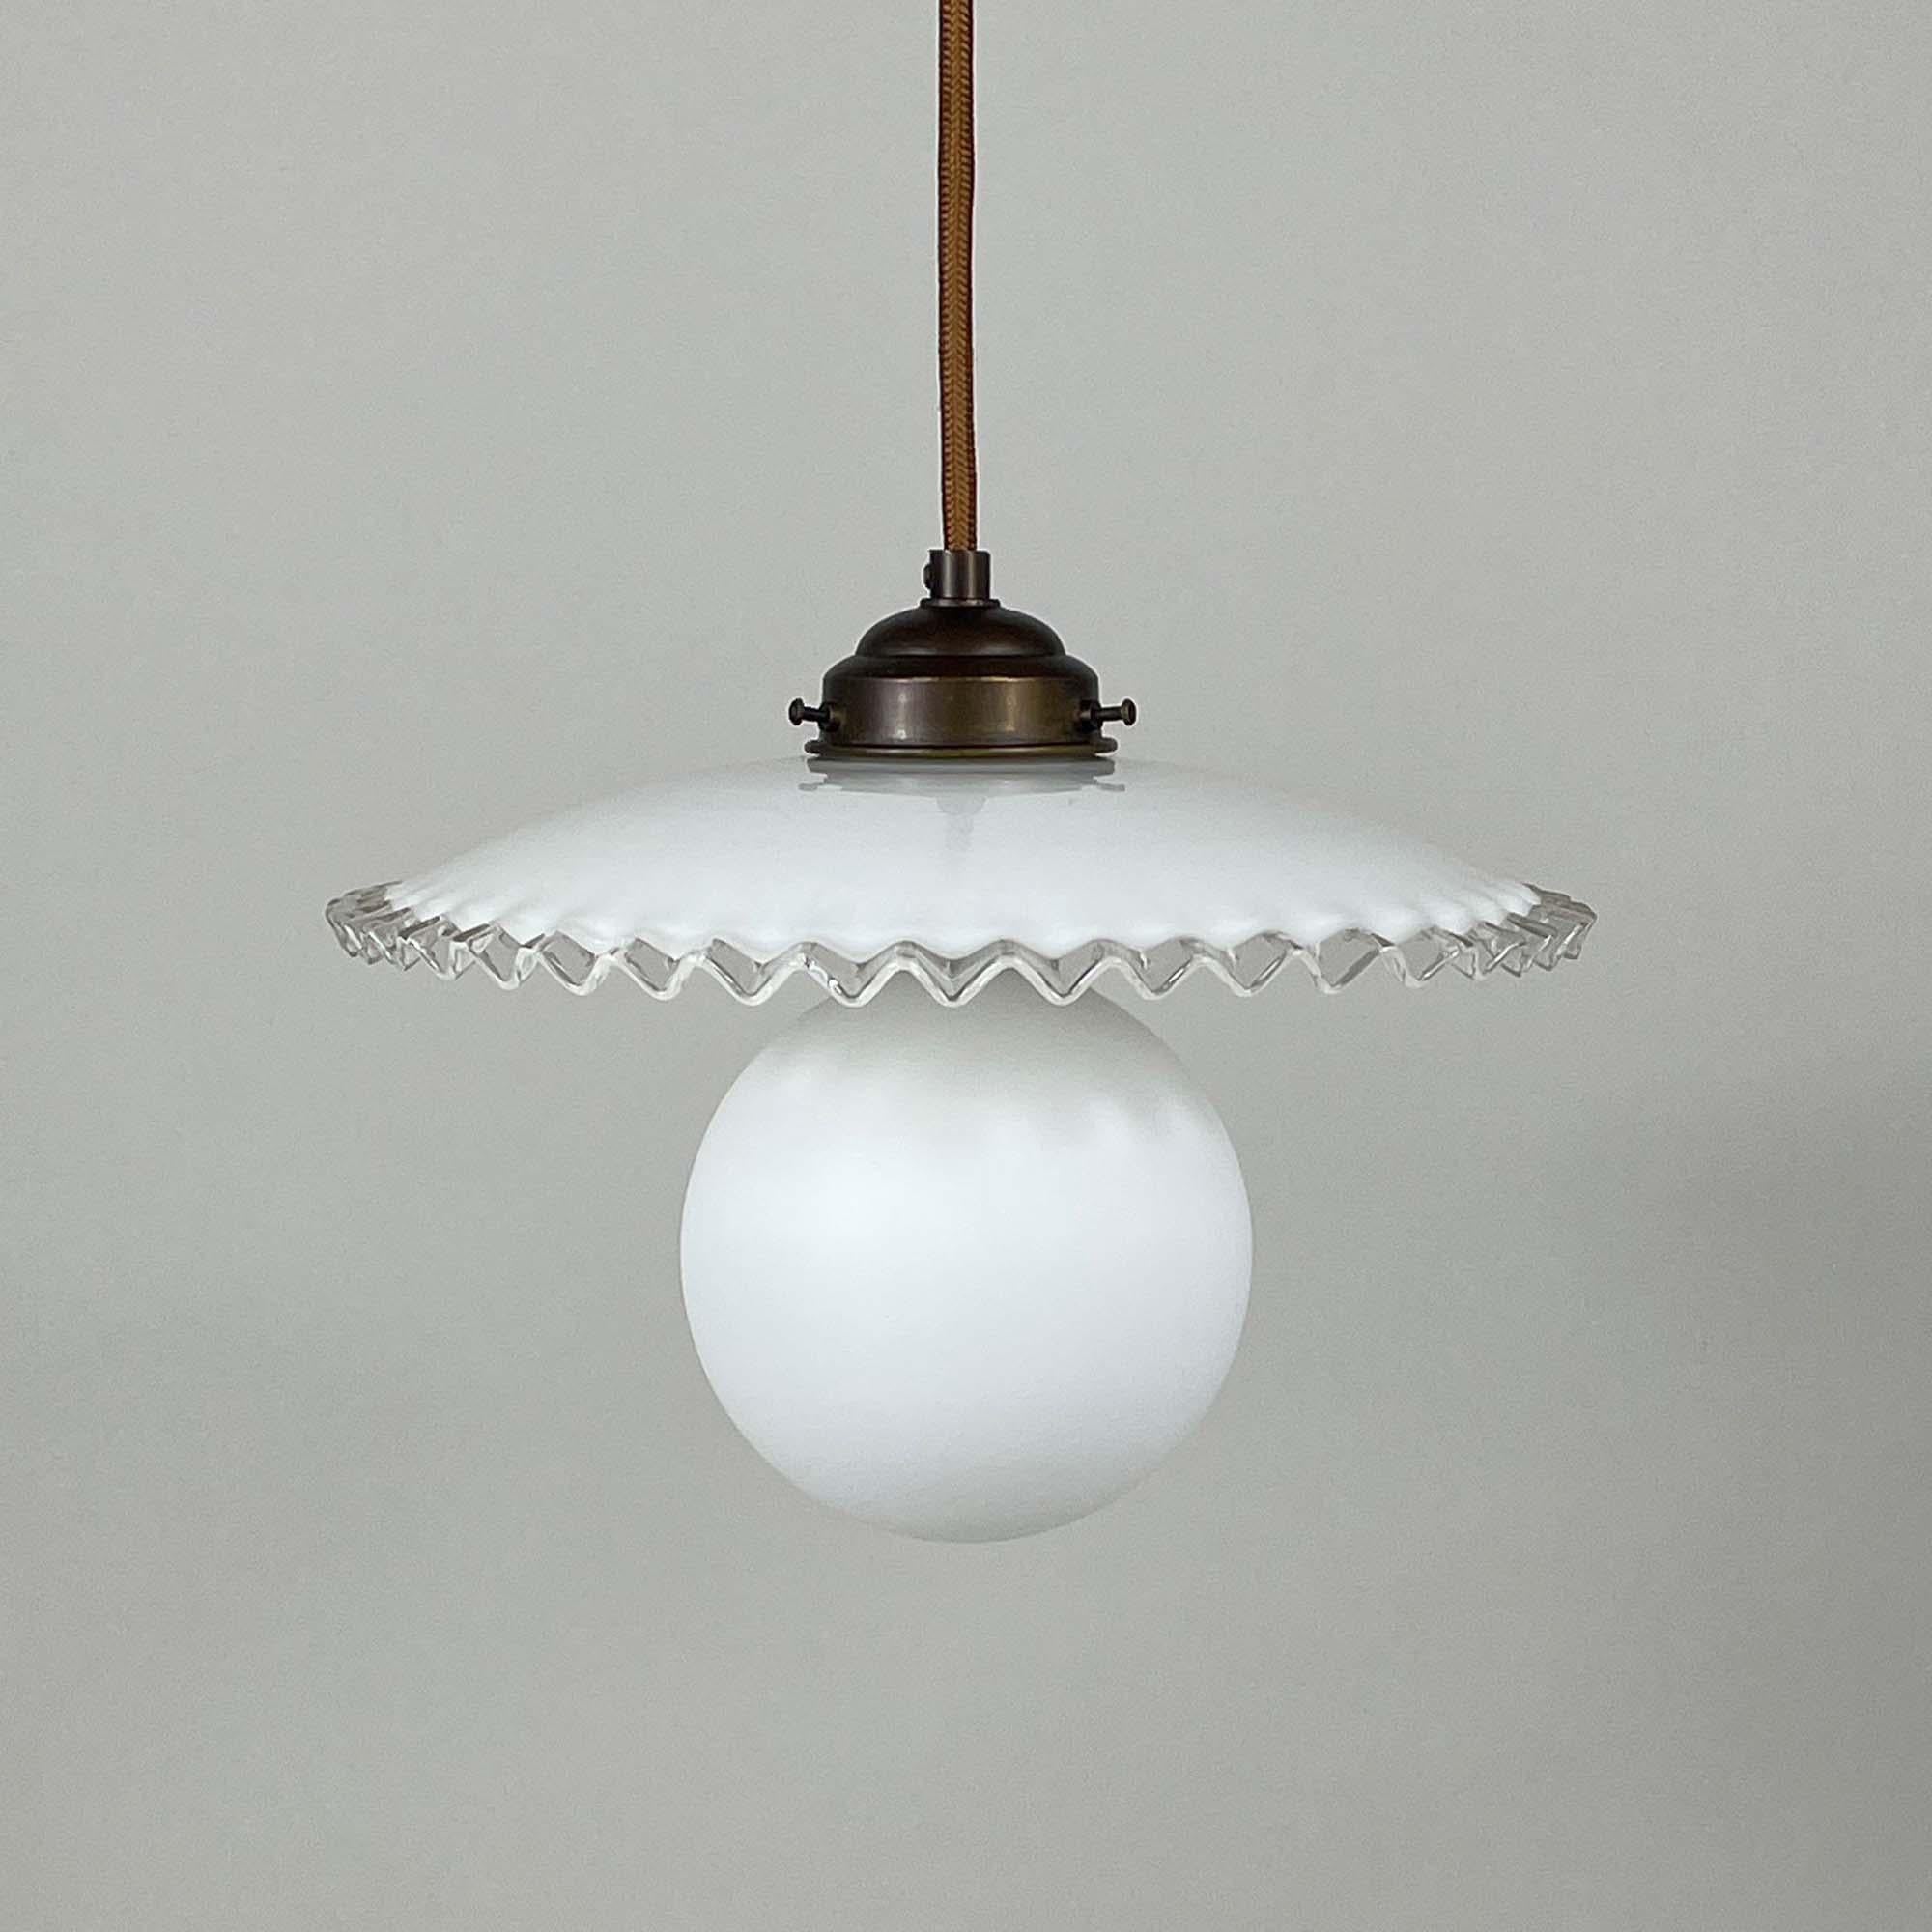 Midcentury French Opaline Glass Pendant Light, 1950s For Sale 5